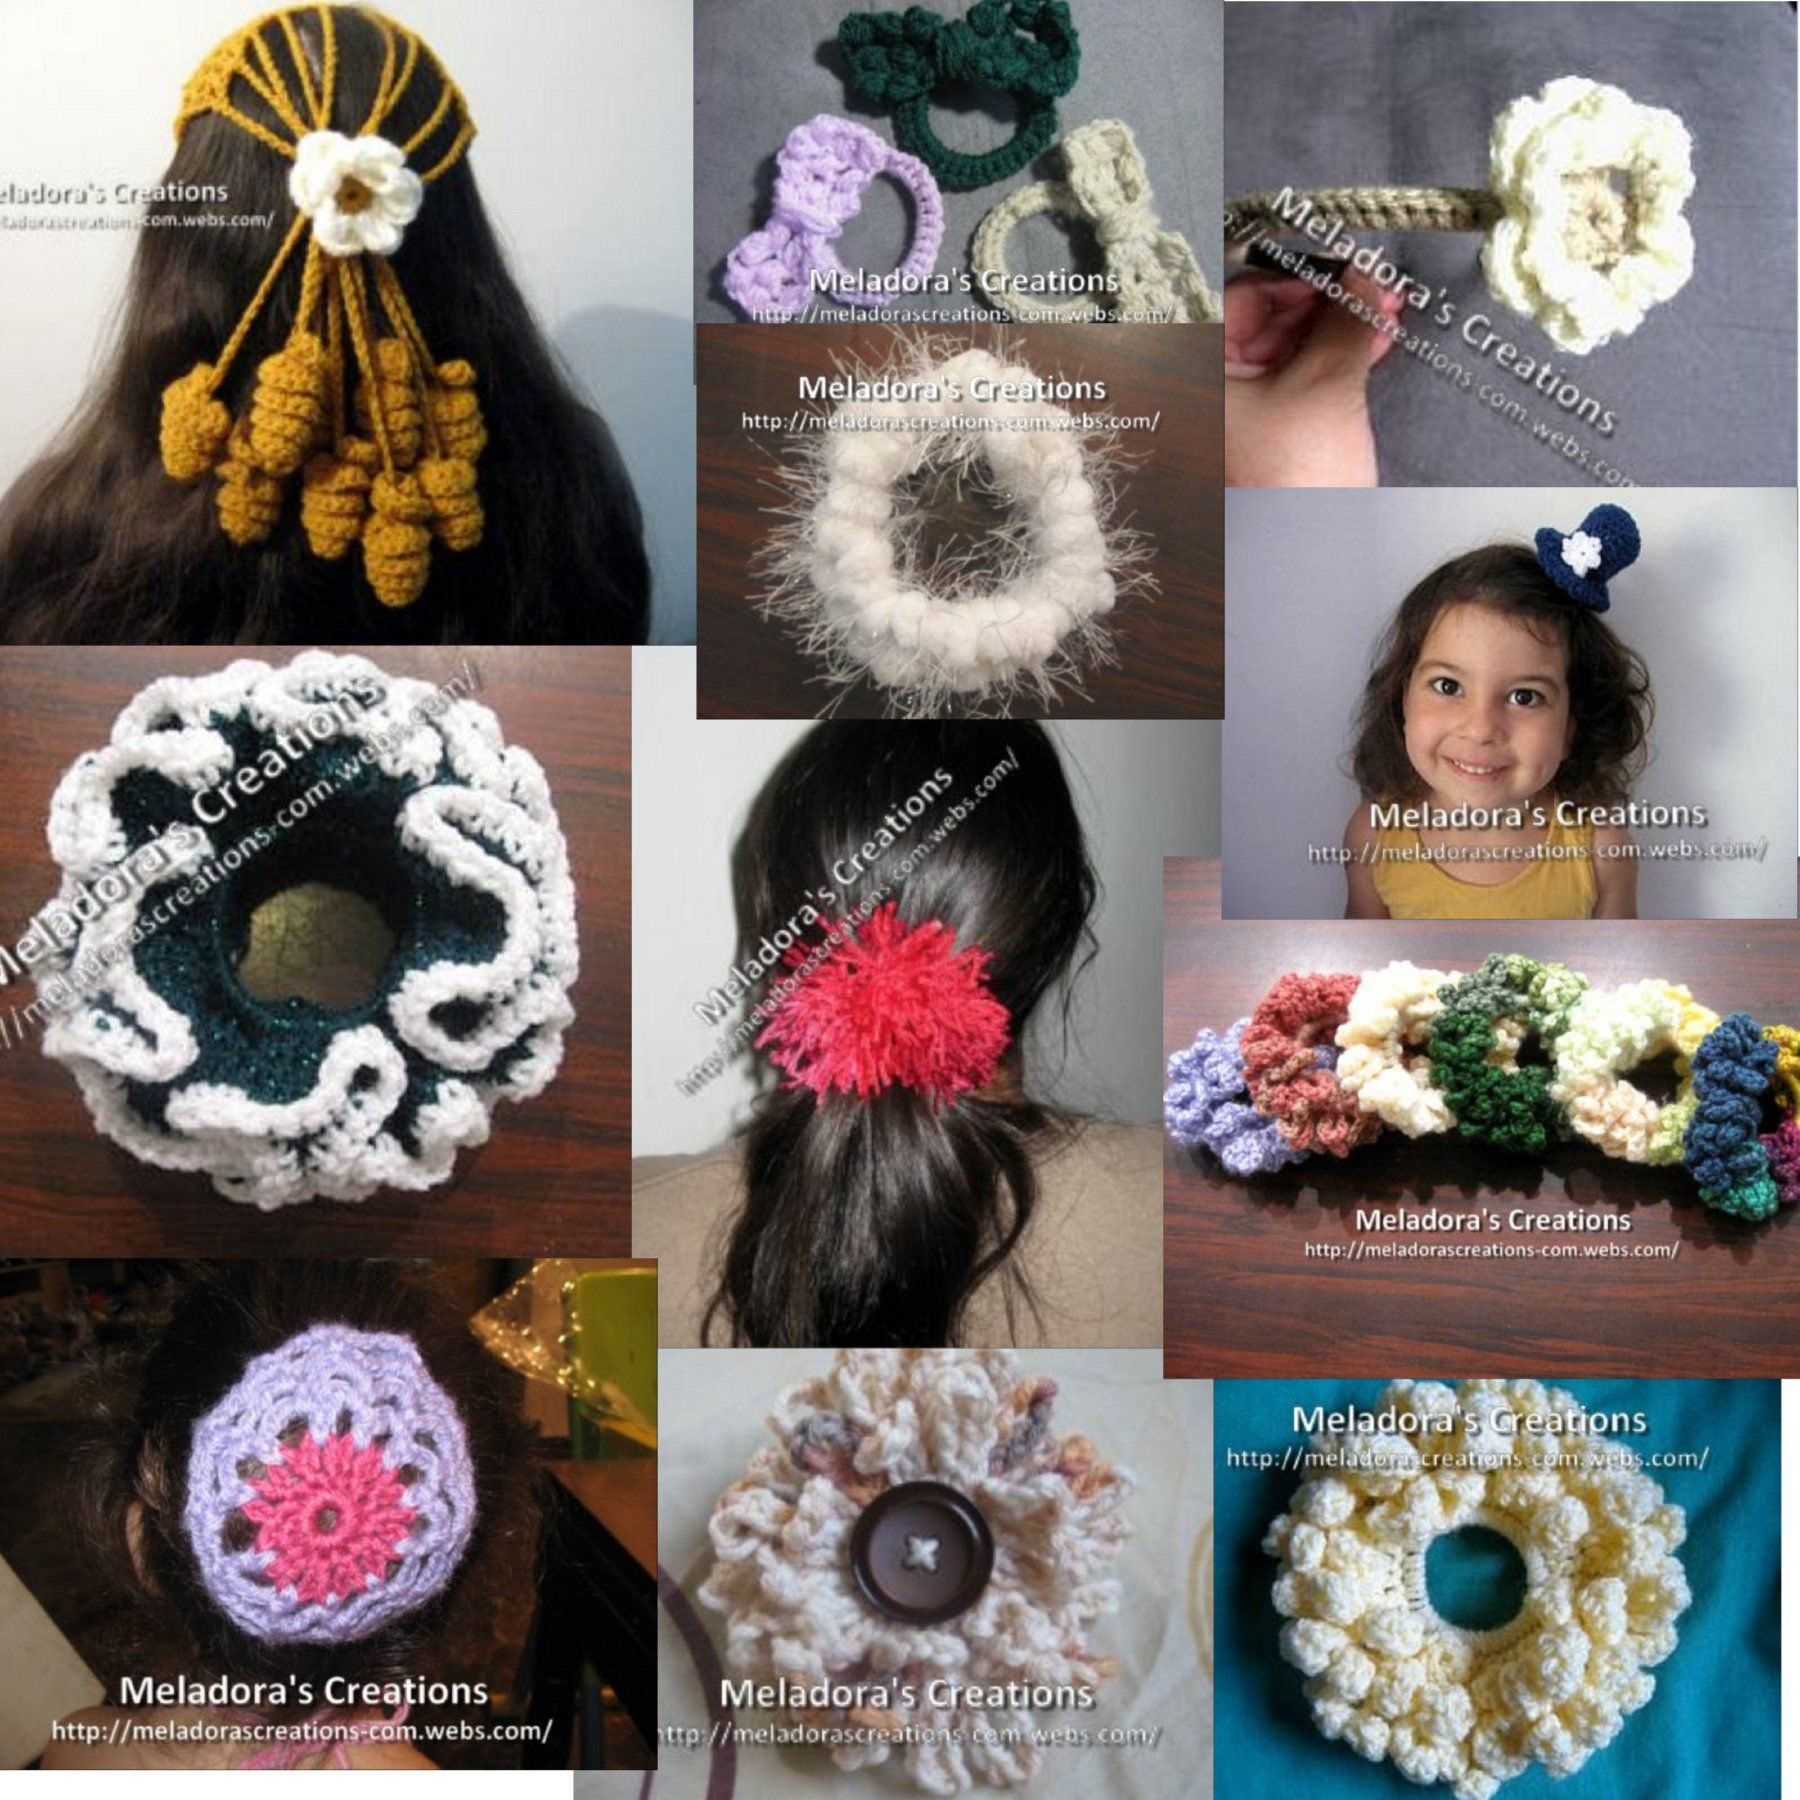 Crochet Hair Clip Patterns Free 14 Free Crochet Patterns And Tutorials For Easy To Make Hair